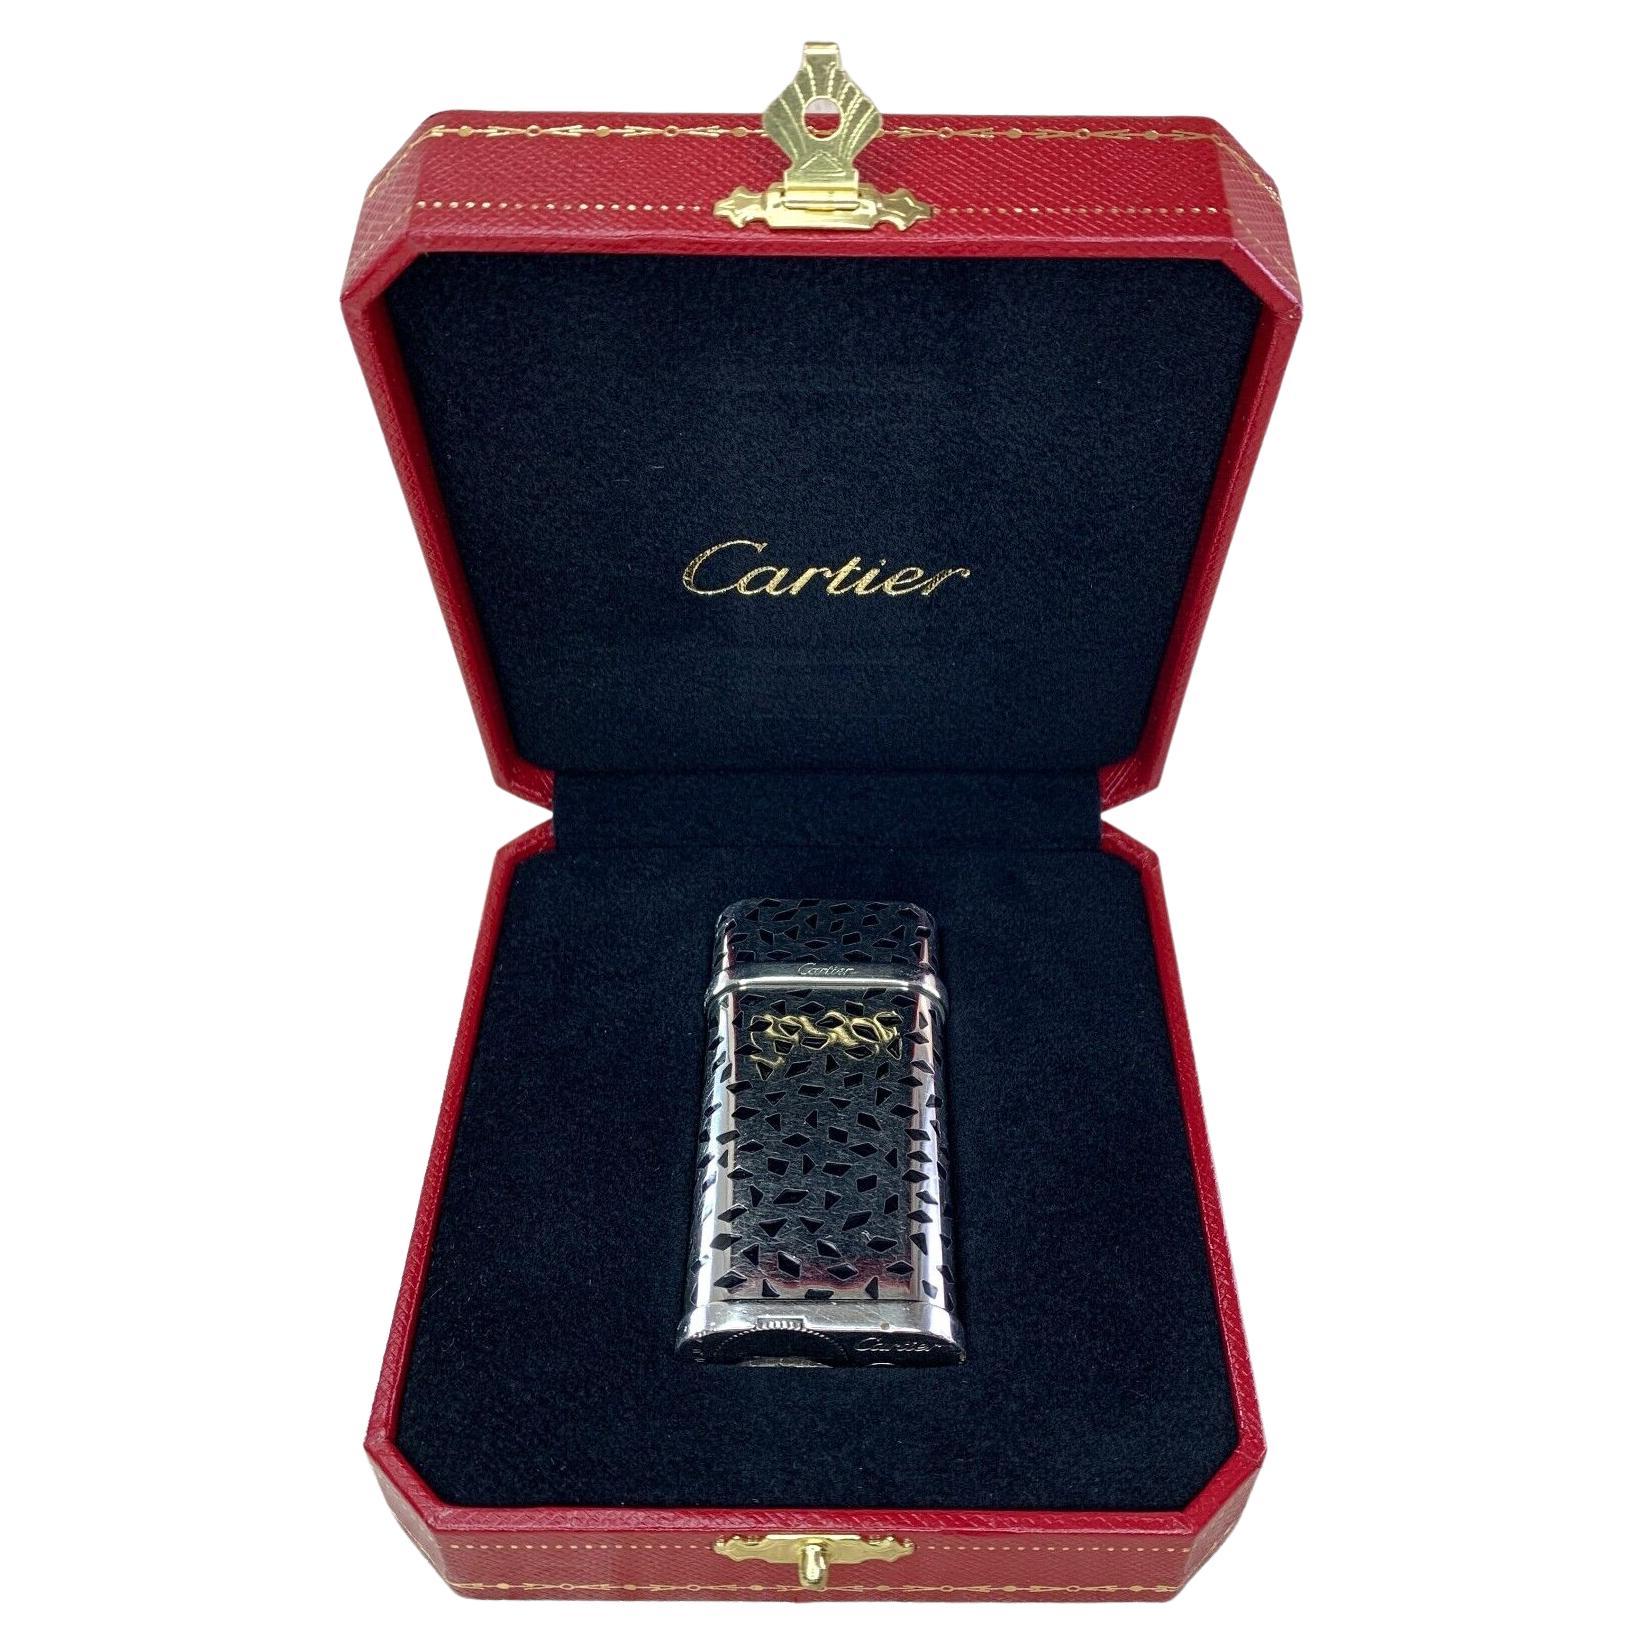 Le Must de Cartier Vintage & Rare Cartier Lighter Black Enamel “Panthere“ Spots Palladium Finish
You do not get this anymore, very rare Cartier Lighter Black Enamel Panthere Spots Palladium Finish
Comes with Cartier red Luxury case with black velvet